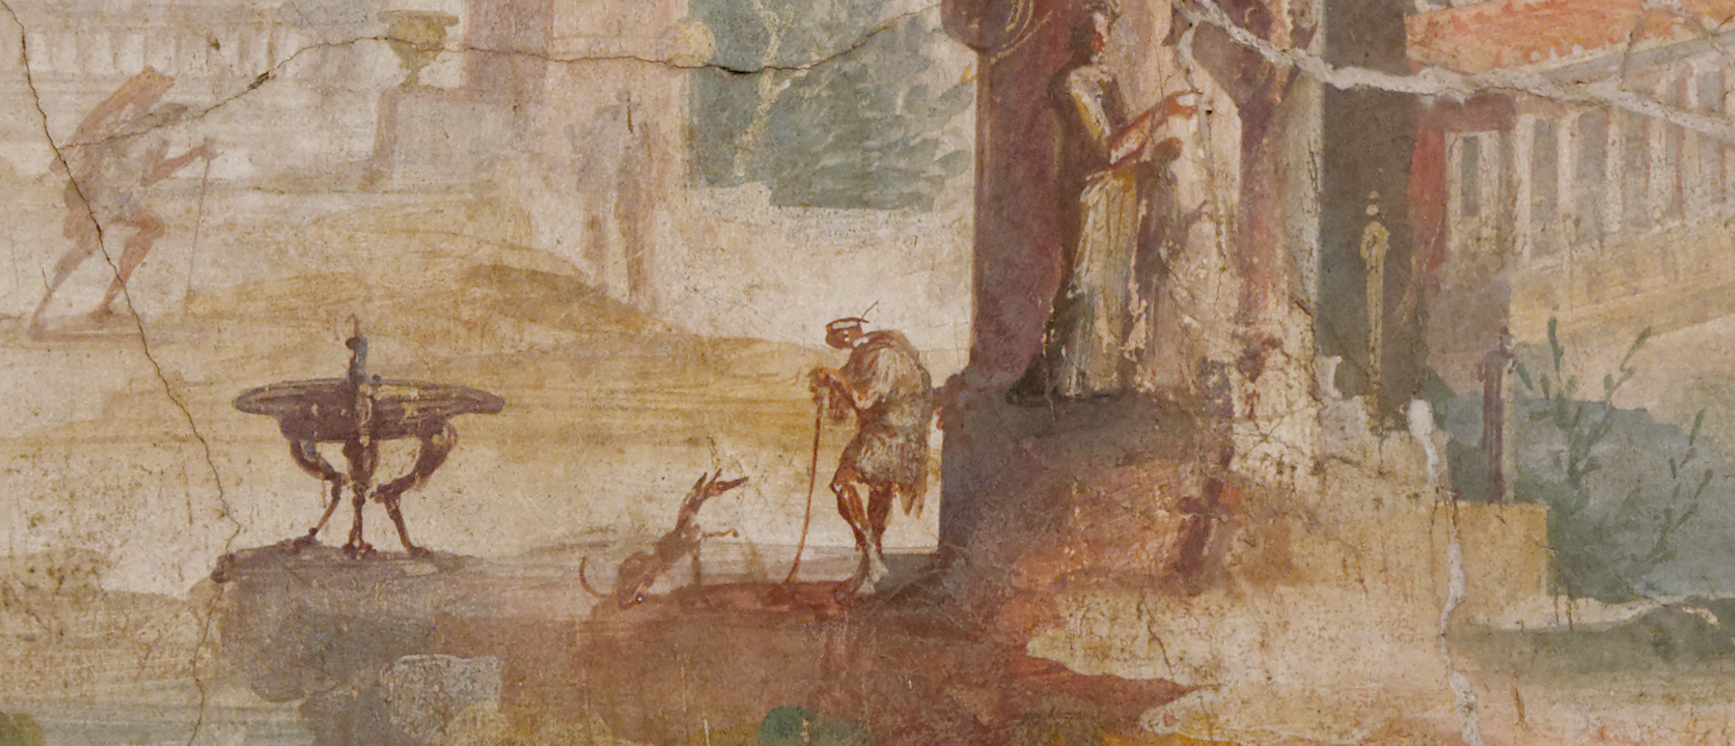 A dog begs from a travel wearied man in this detail from a first-century fresco. Image courtesy of Wikimedia Commons. https://commons.wikimedia.org/wiki/File:Alexandrian_landscape_MAN_Napoli_Inv147502.jpg